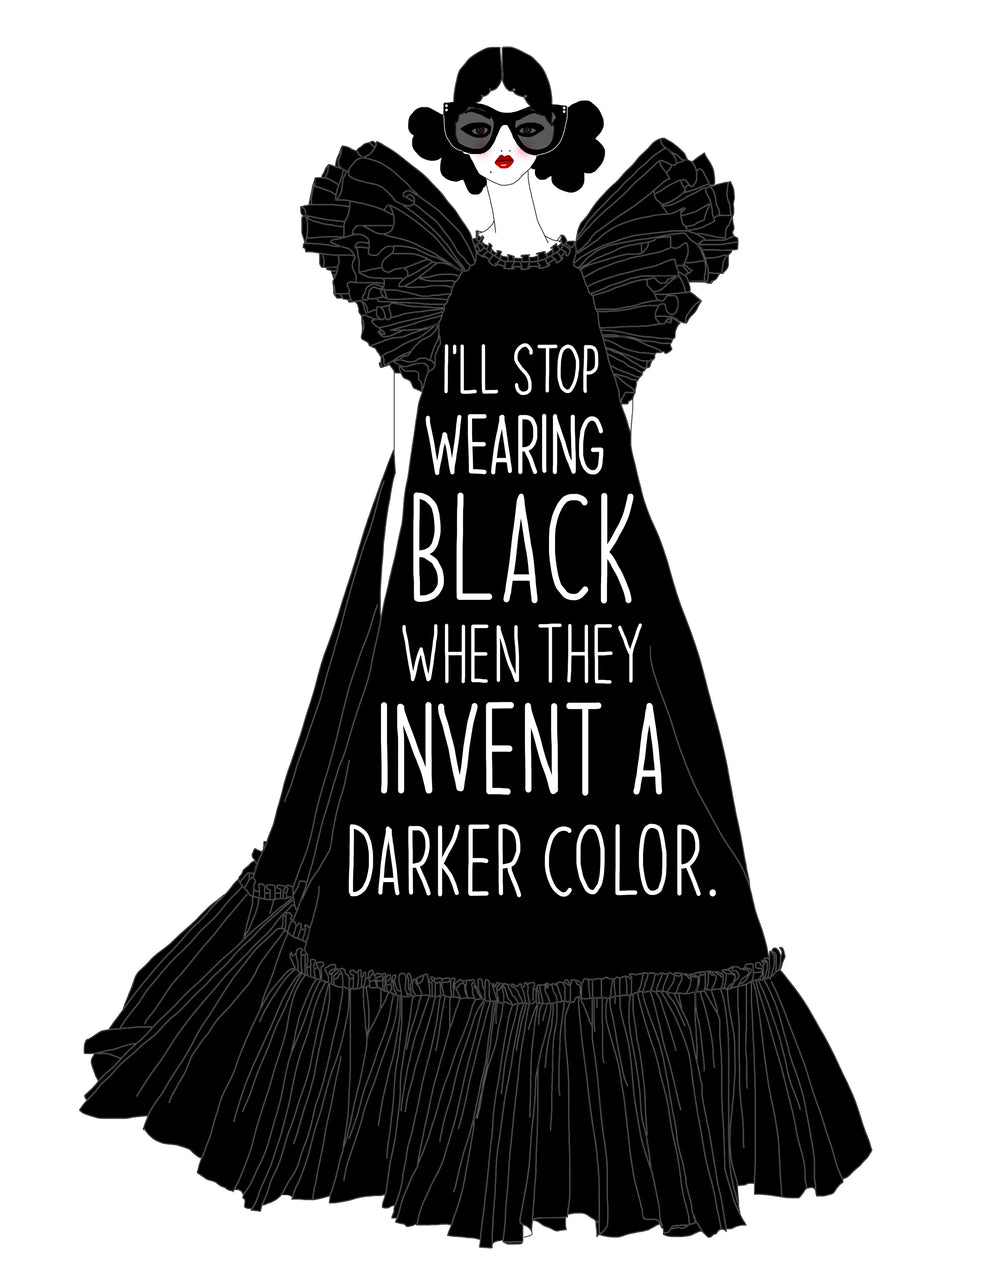 I'll Stop Wearing Black When They Invent a Darker Color.